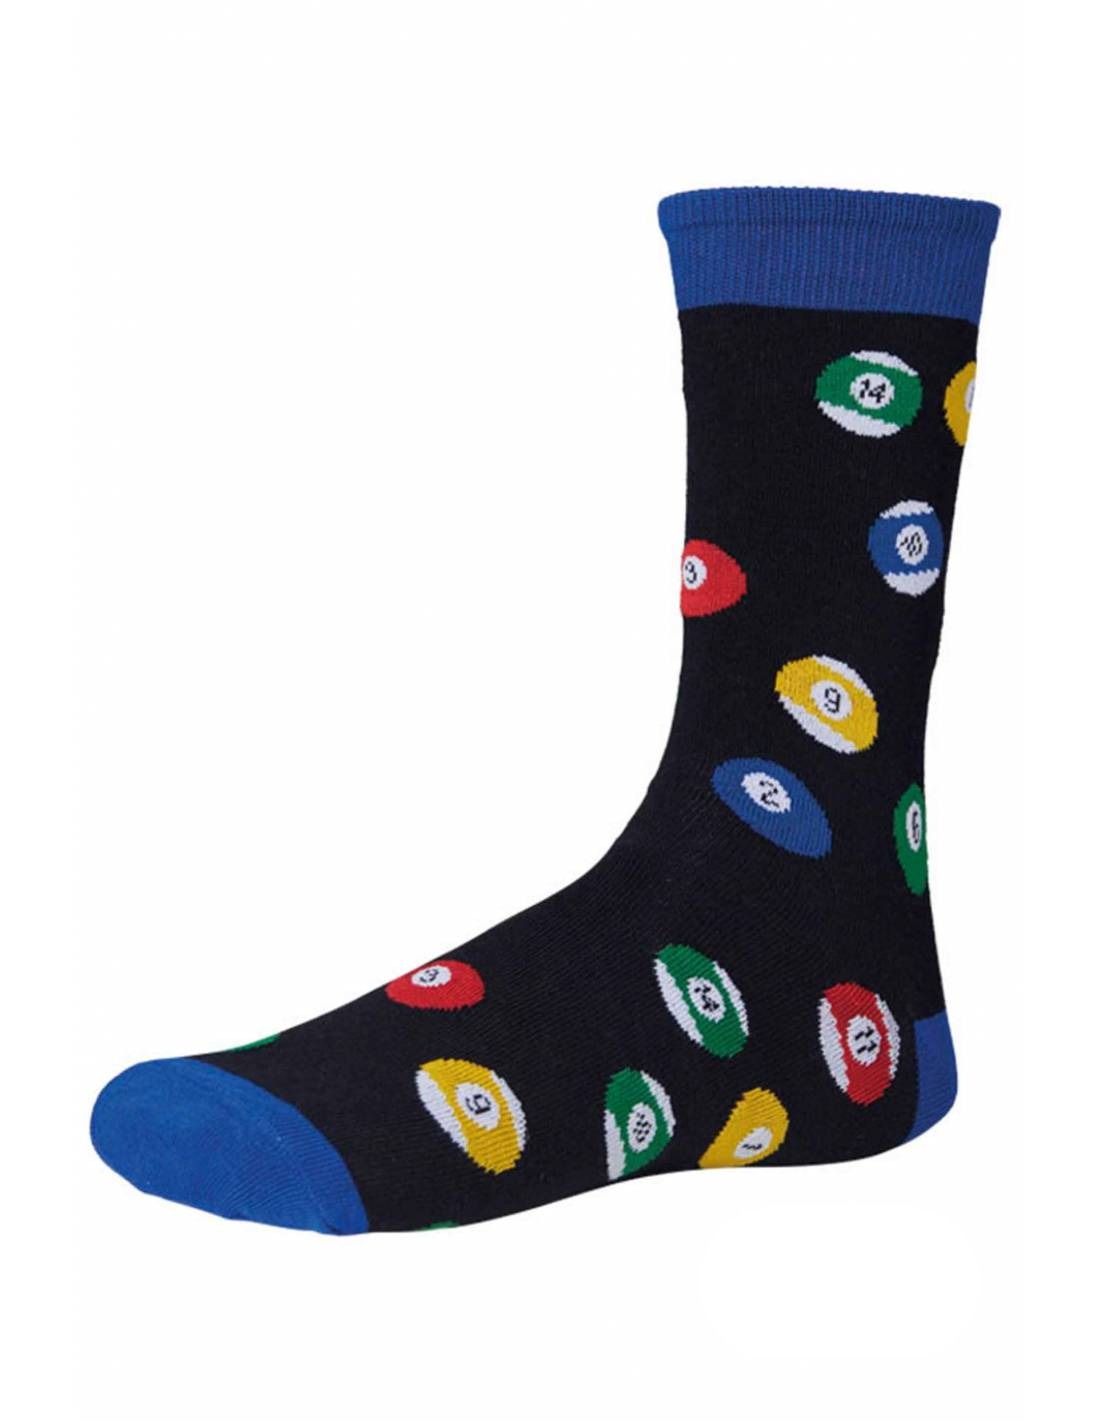 Ysabel Mora 22799 Pool Sock - Men's navy cotton ankle socks with an all over pool balls pattern in blue, red, green and yellow and blue and a red cuff, toe and heel.